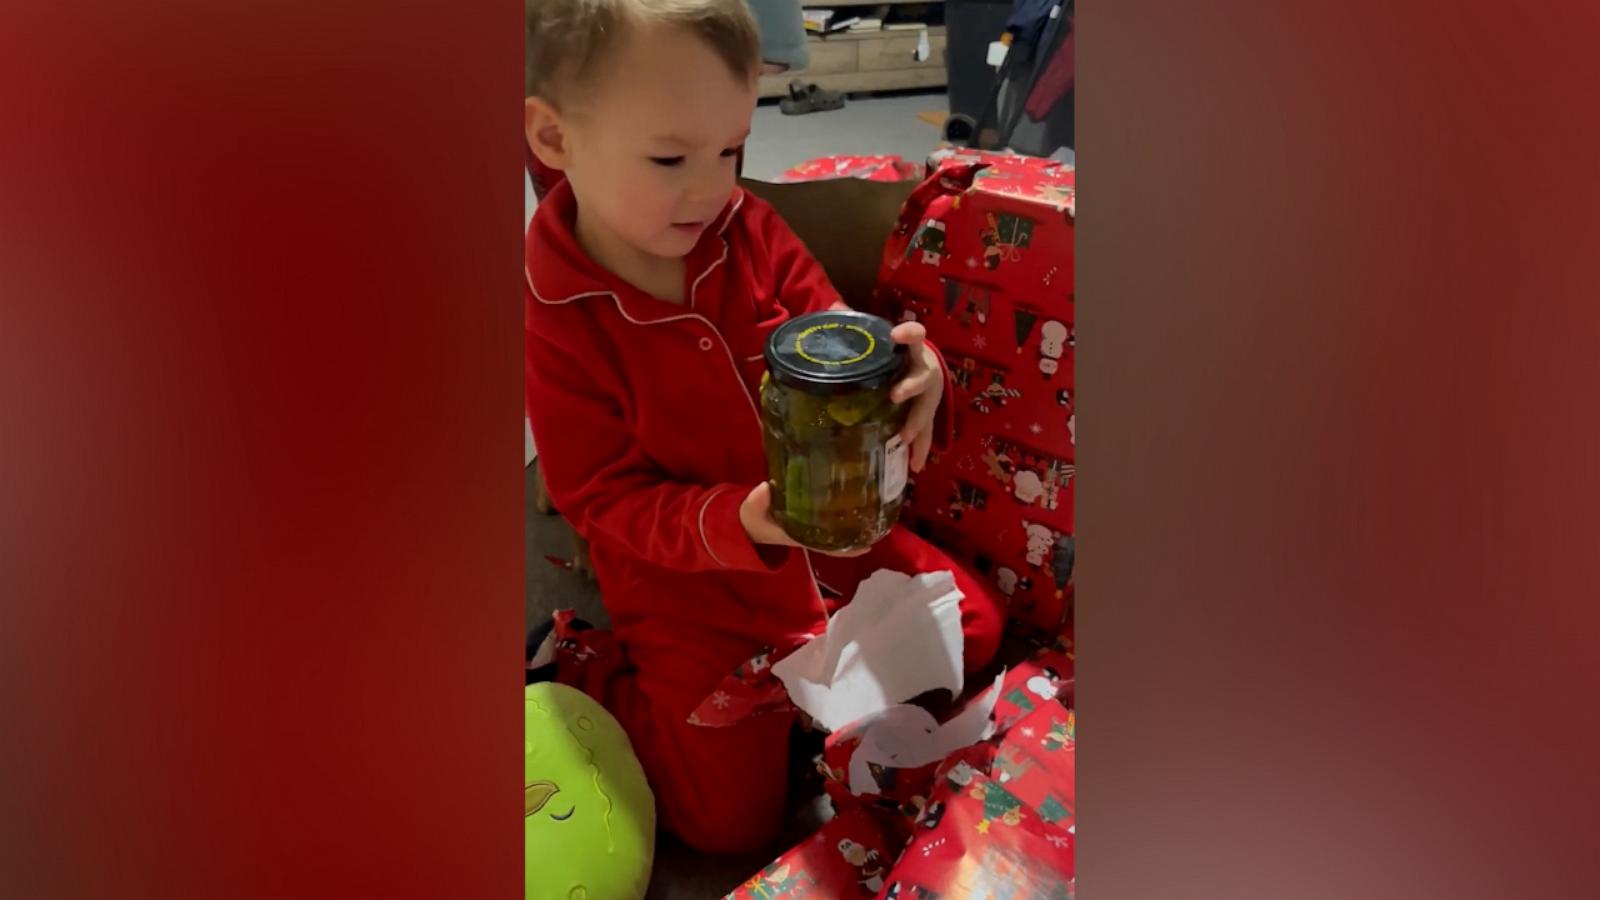 VIDEO: No one was more excited than this toddler to receive a jar of pickles for Christmas